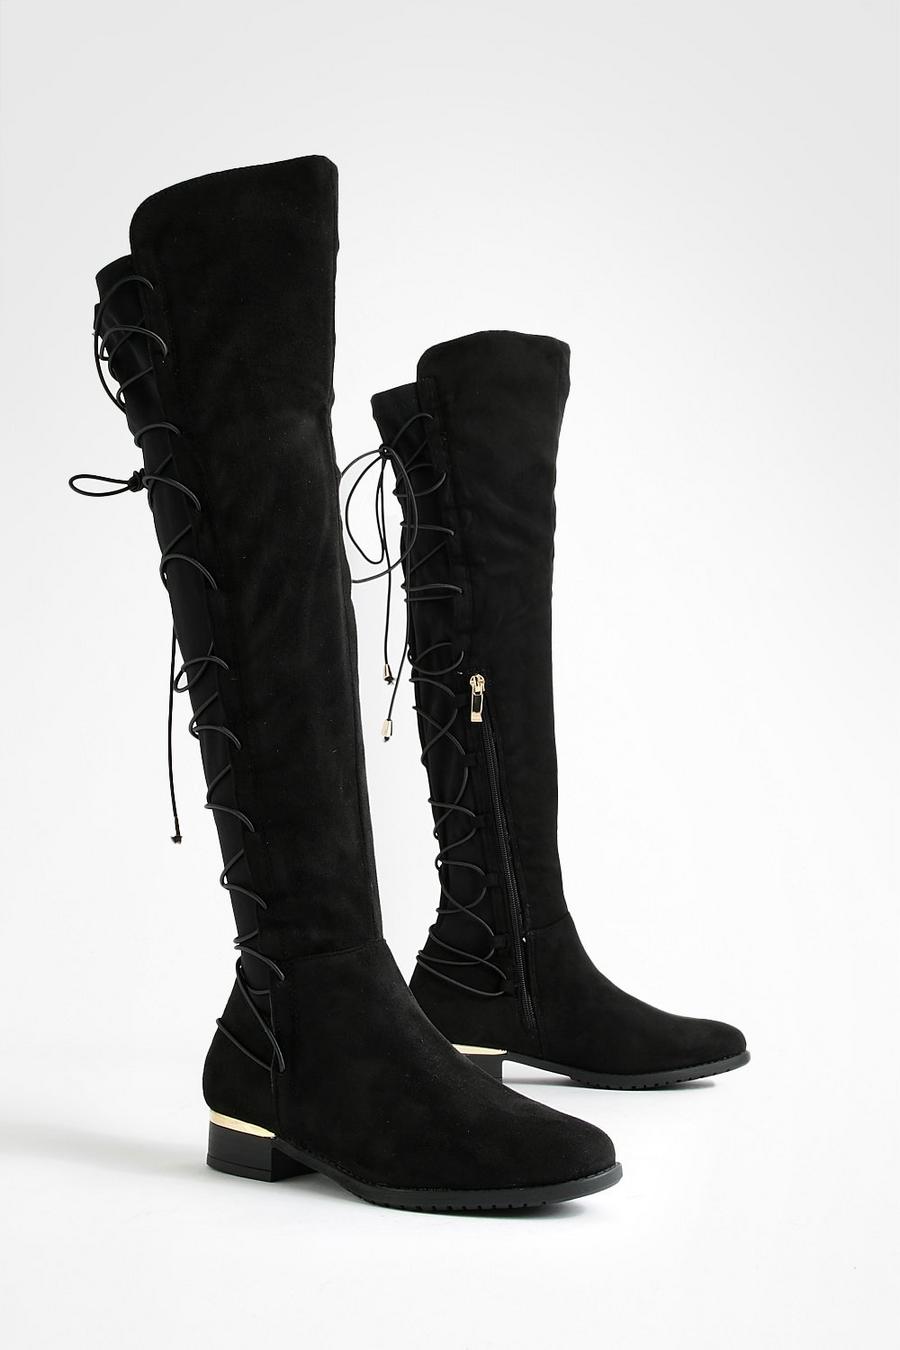 Ladies Thigh High Over The Knee Lace Up Boots Womens Stretch Flat Low Shoes Size 